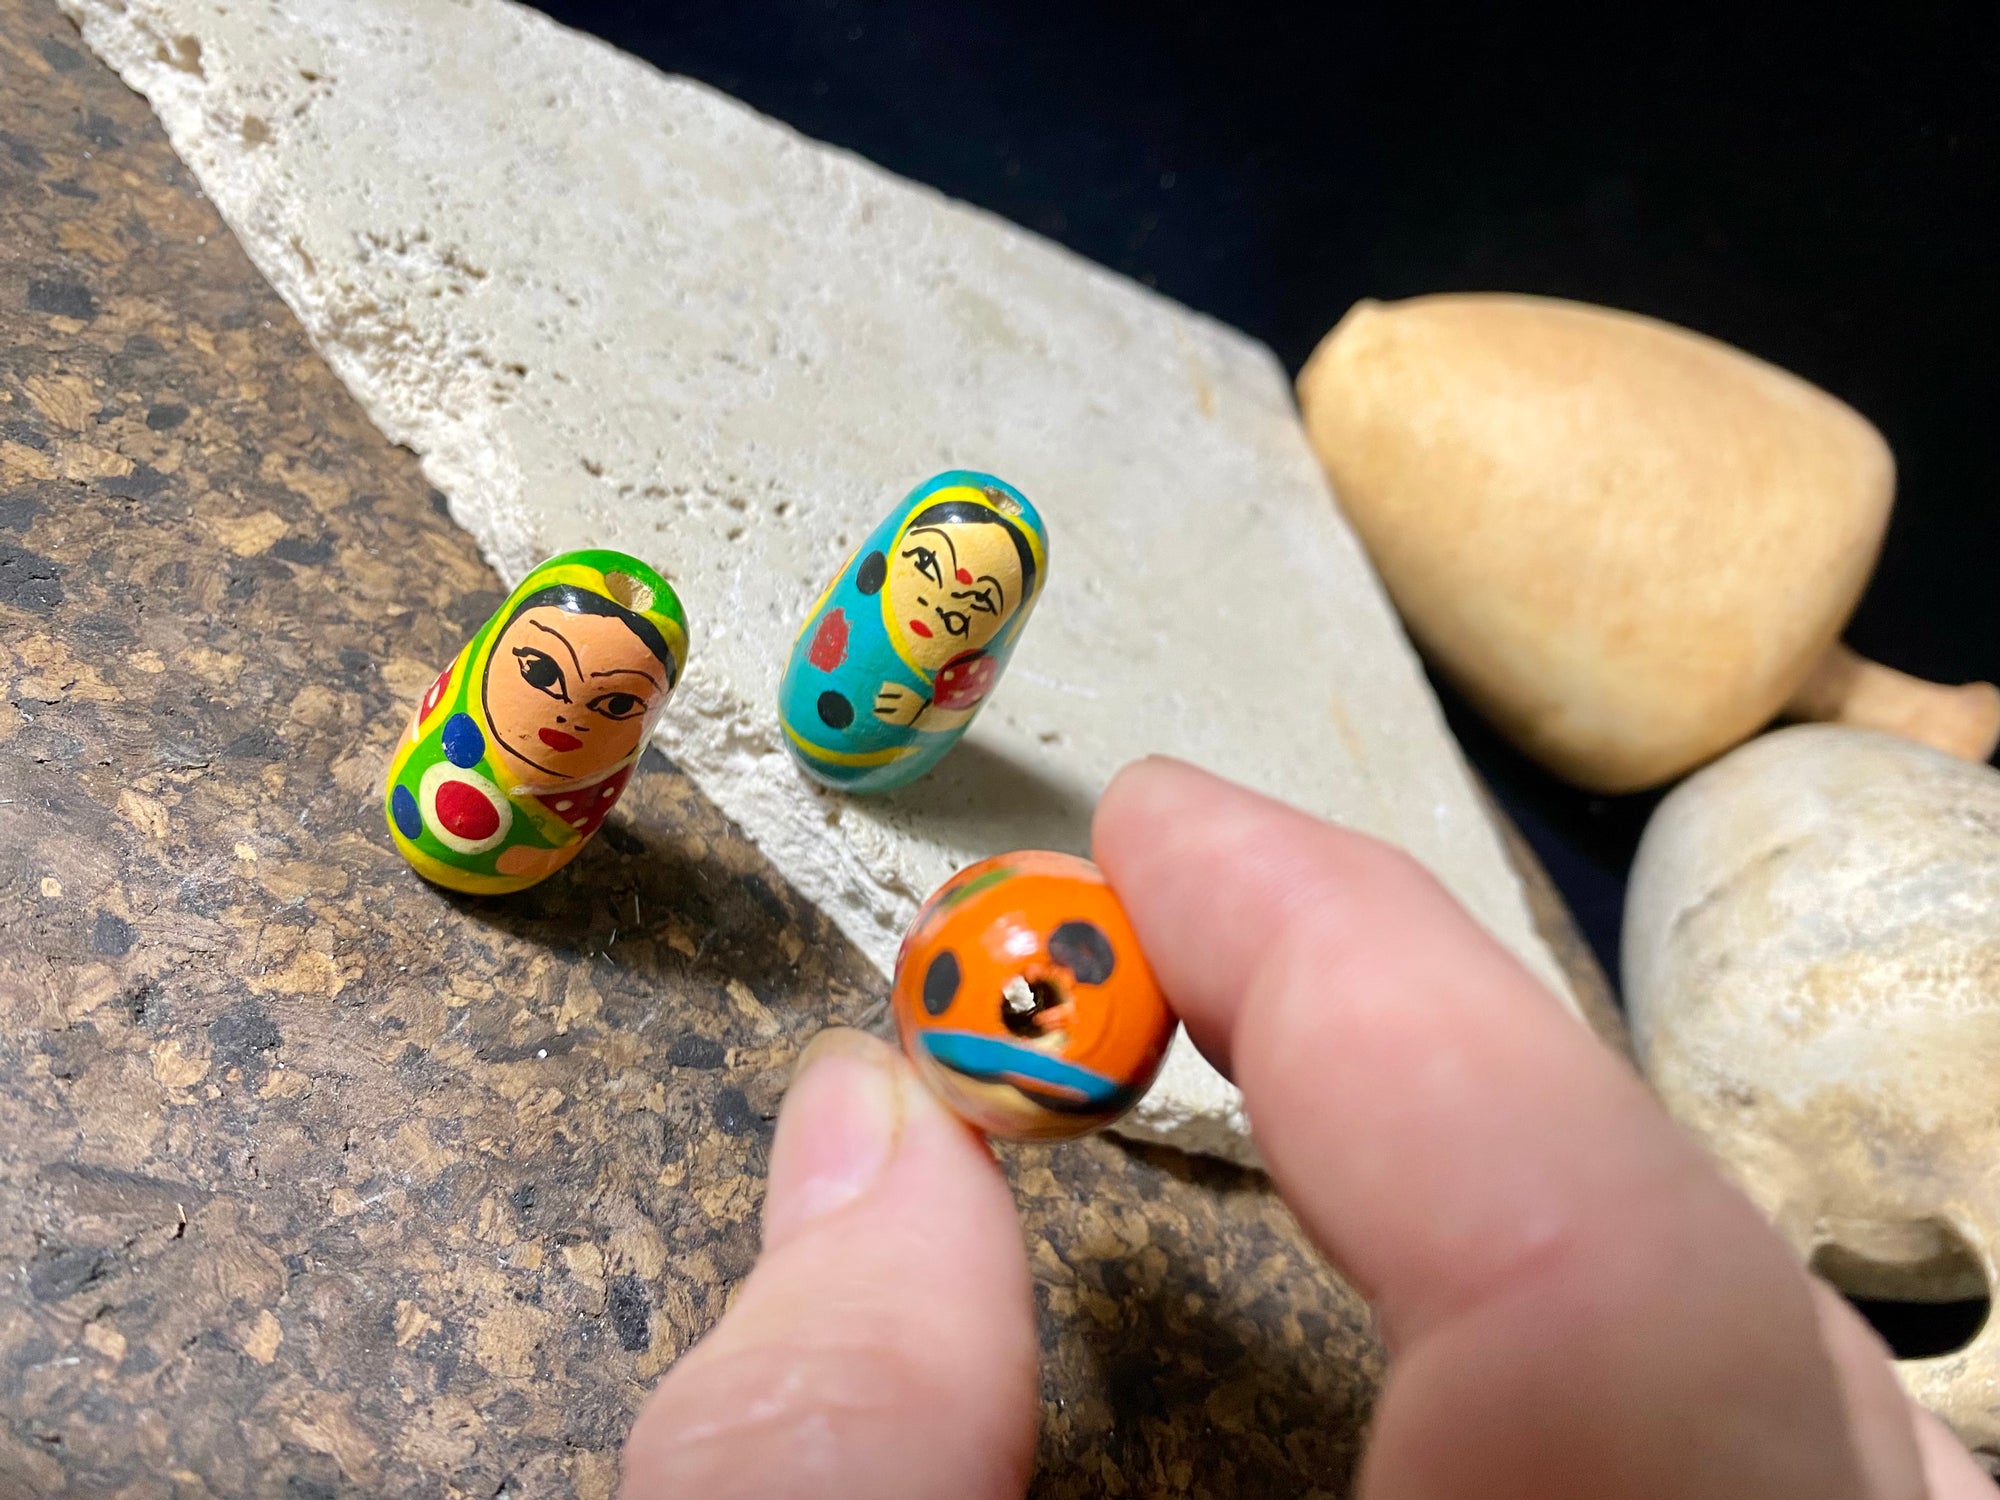 Novelty beads perfect for beading projects or as little doll statues. Made from lightweight wood and hand painted in the style of babushka dolls but with an Indian twist, our wood beads are great gifts for kids. Light enough to be worn as earrings. Perfect for a jewellery project. Height 2.6 cm, width 1.5 cm